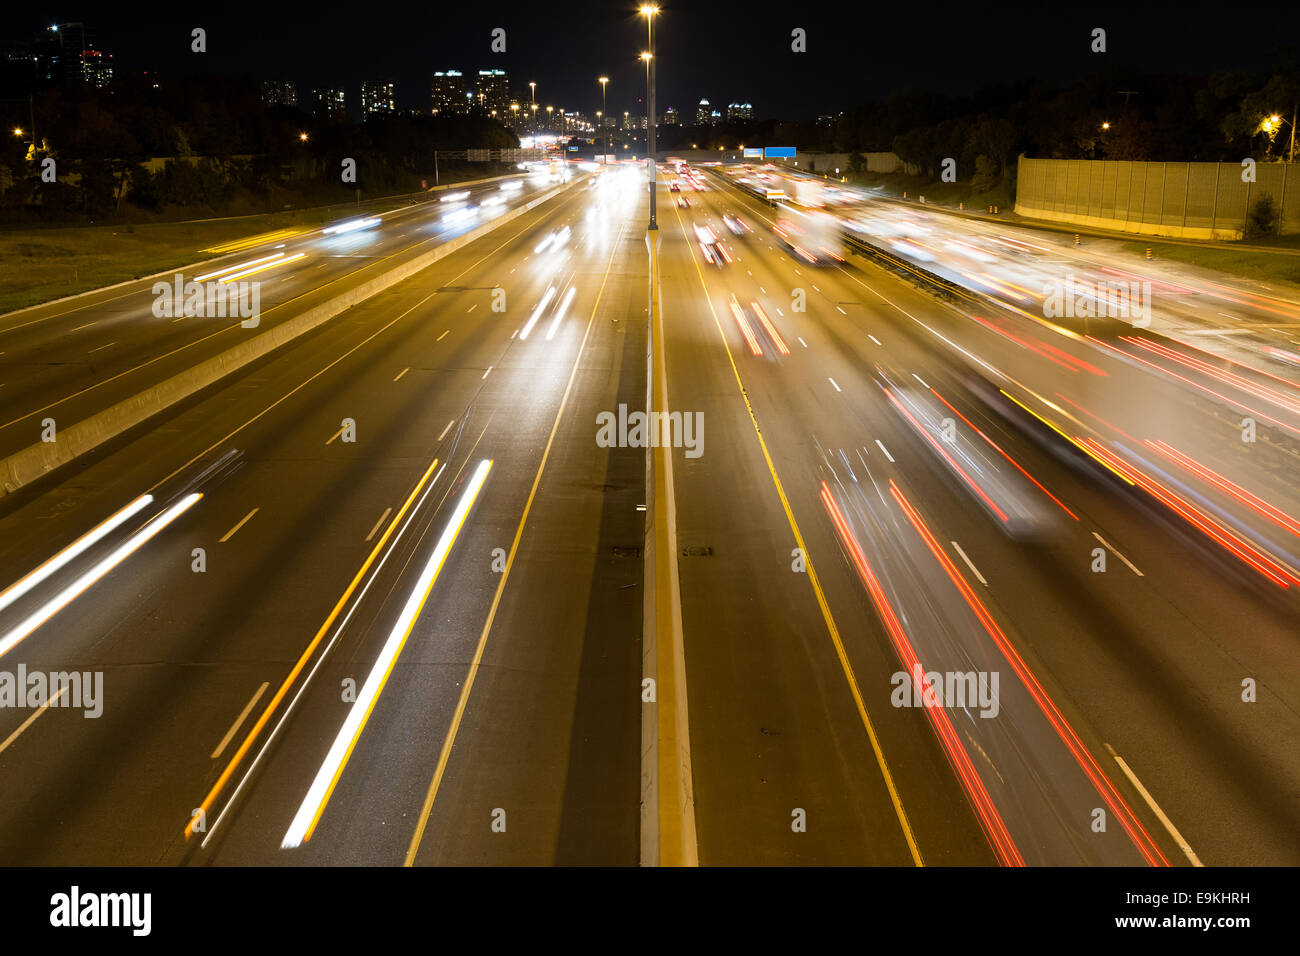 A view of Short Light trails on a highway Stock Photo